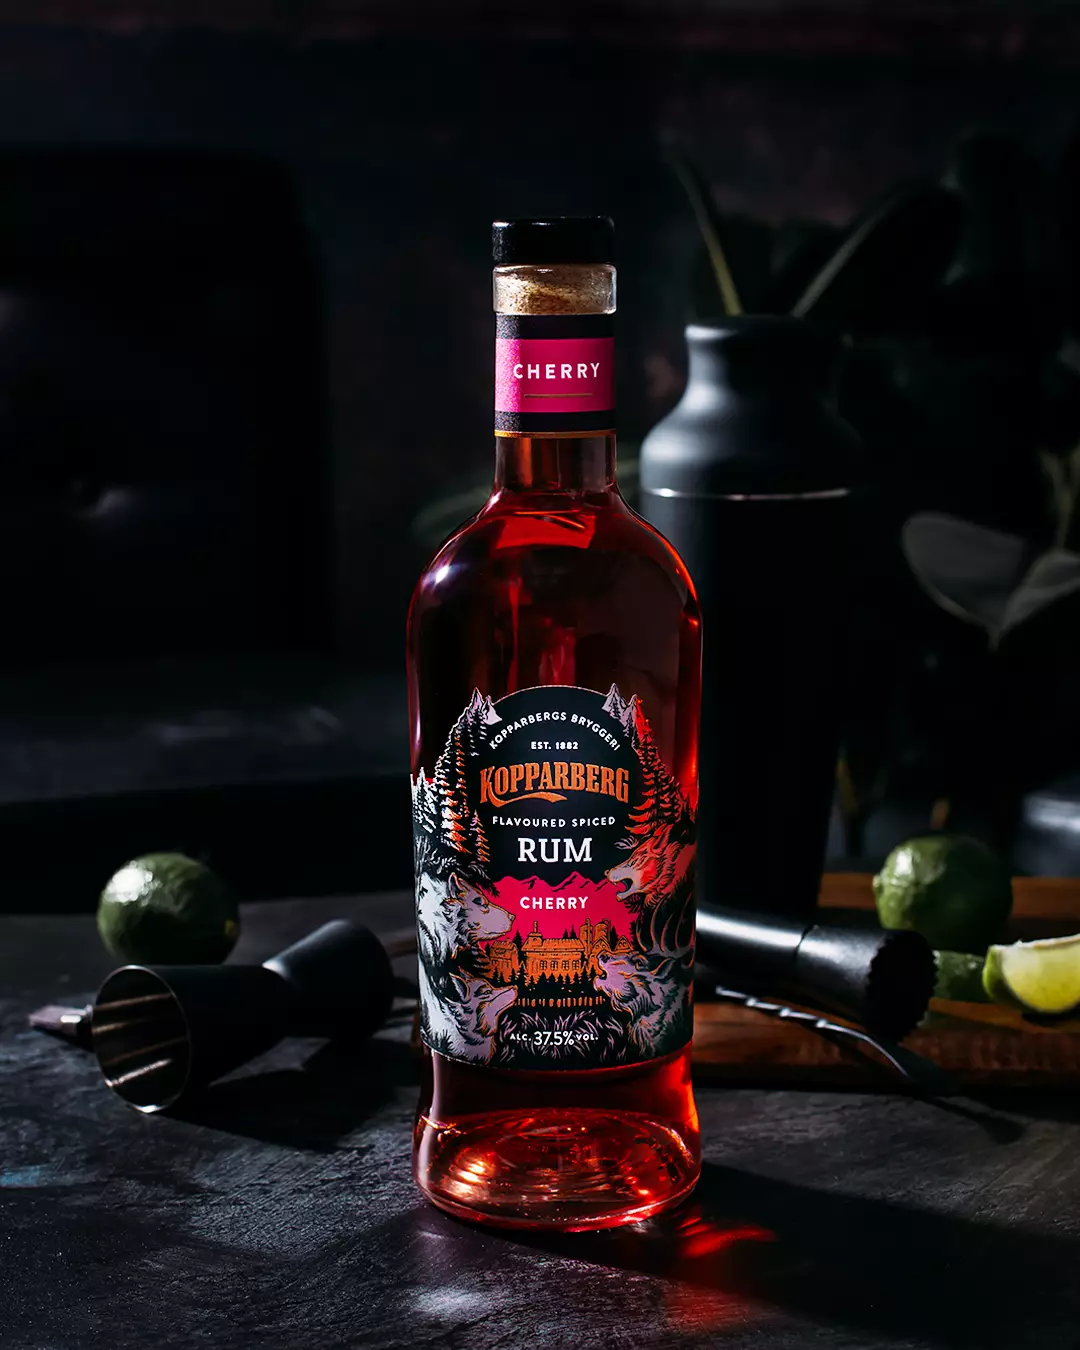 Kopparberg Cherry Spiced Rum infuses a deep, spiced rum with bold and bright cherry fruit flavours (